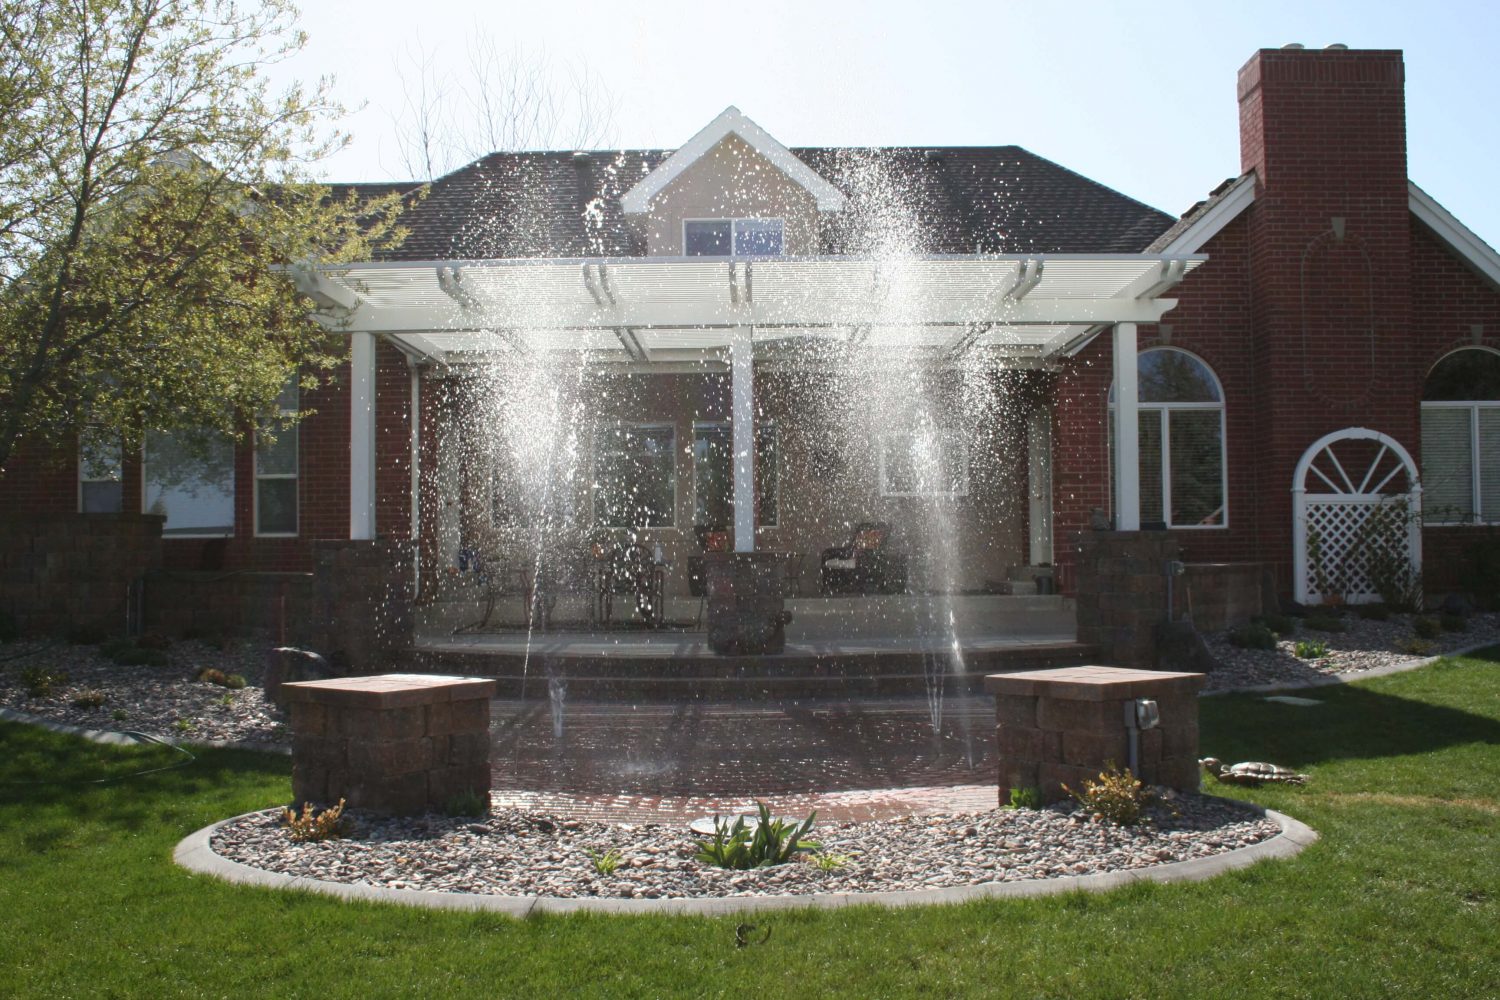 Sprinkler feature planned as a part of a residential landscaping project in Twin Falls, ID